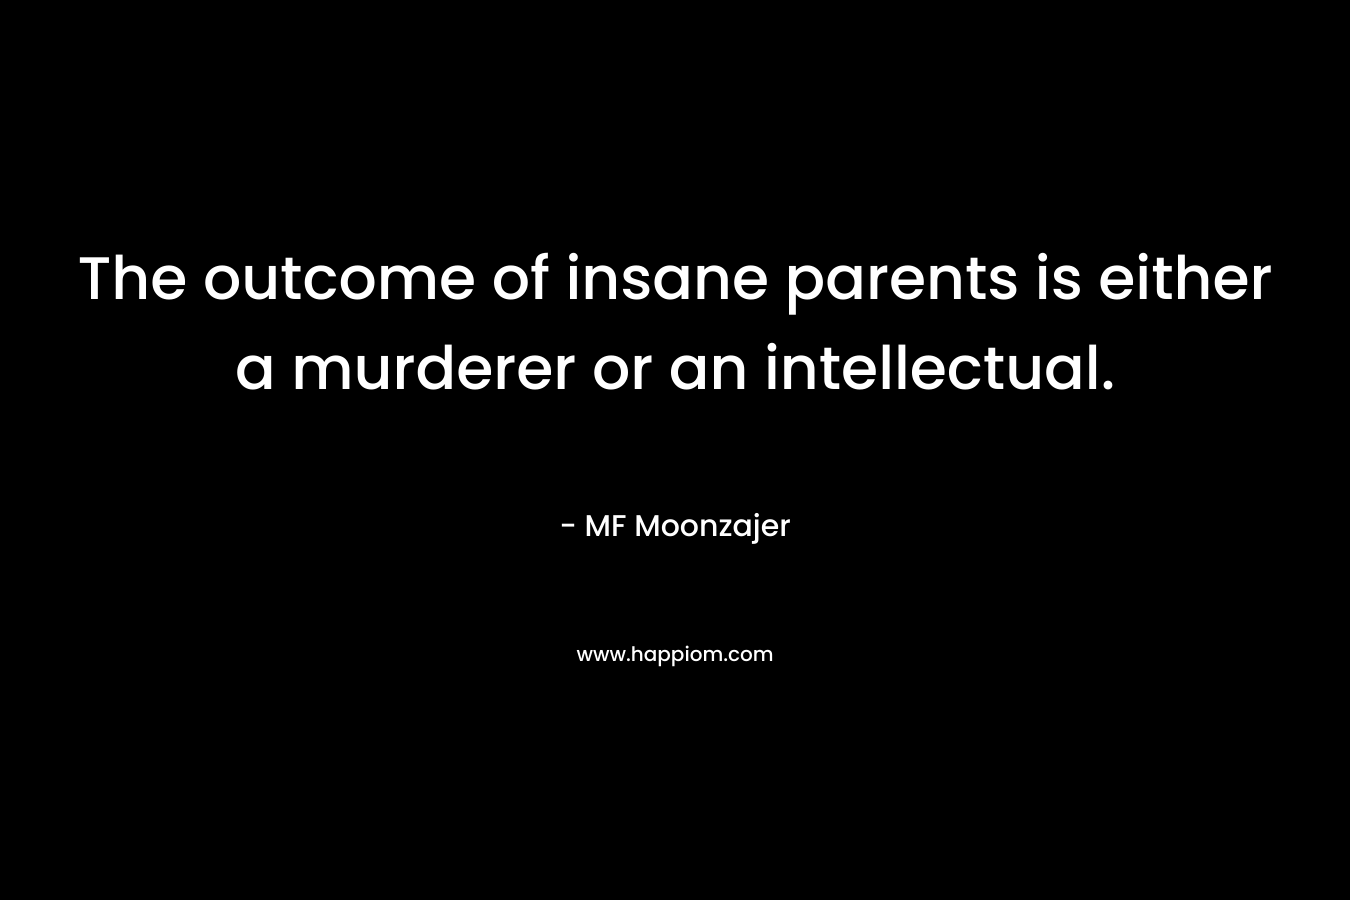 The outcome of insane parents is either a murderer or an intellectual. – MF Moonzajer